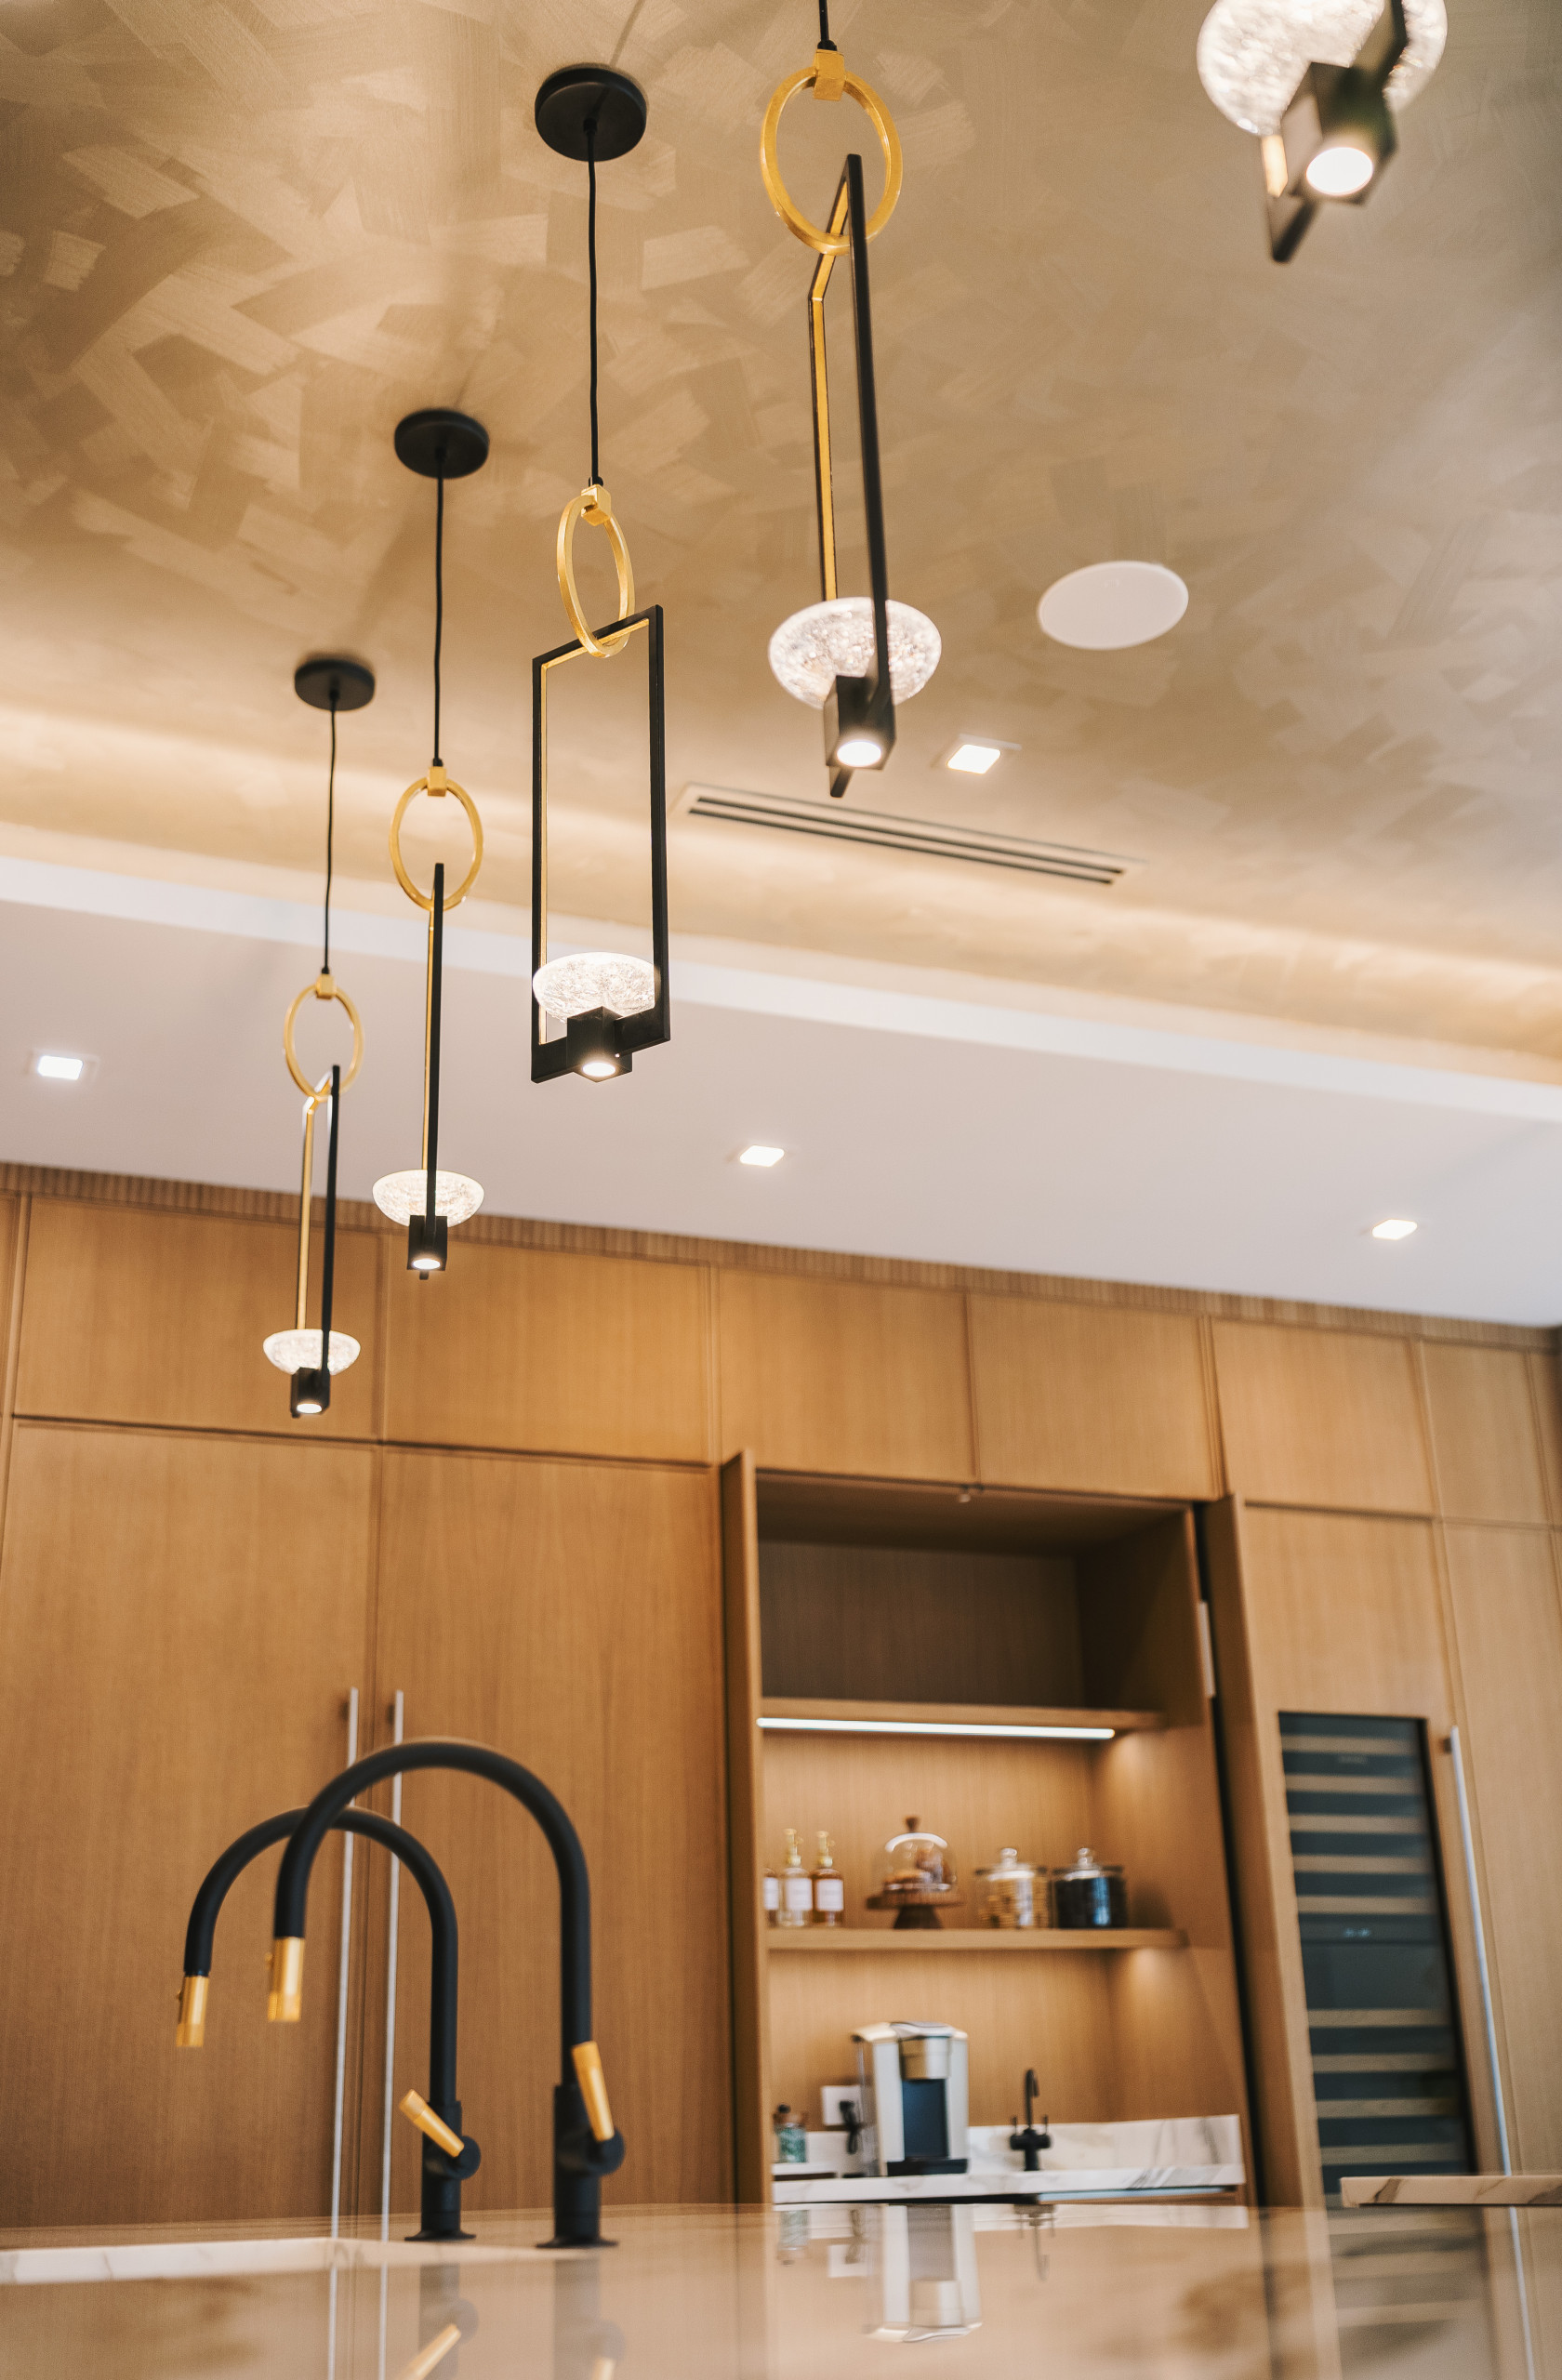 Radiant Elegance: Pendant Lighting and Hand-Painted Ceiling Finish